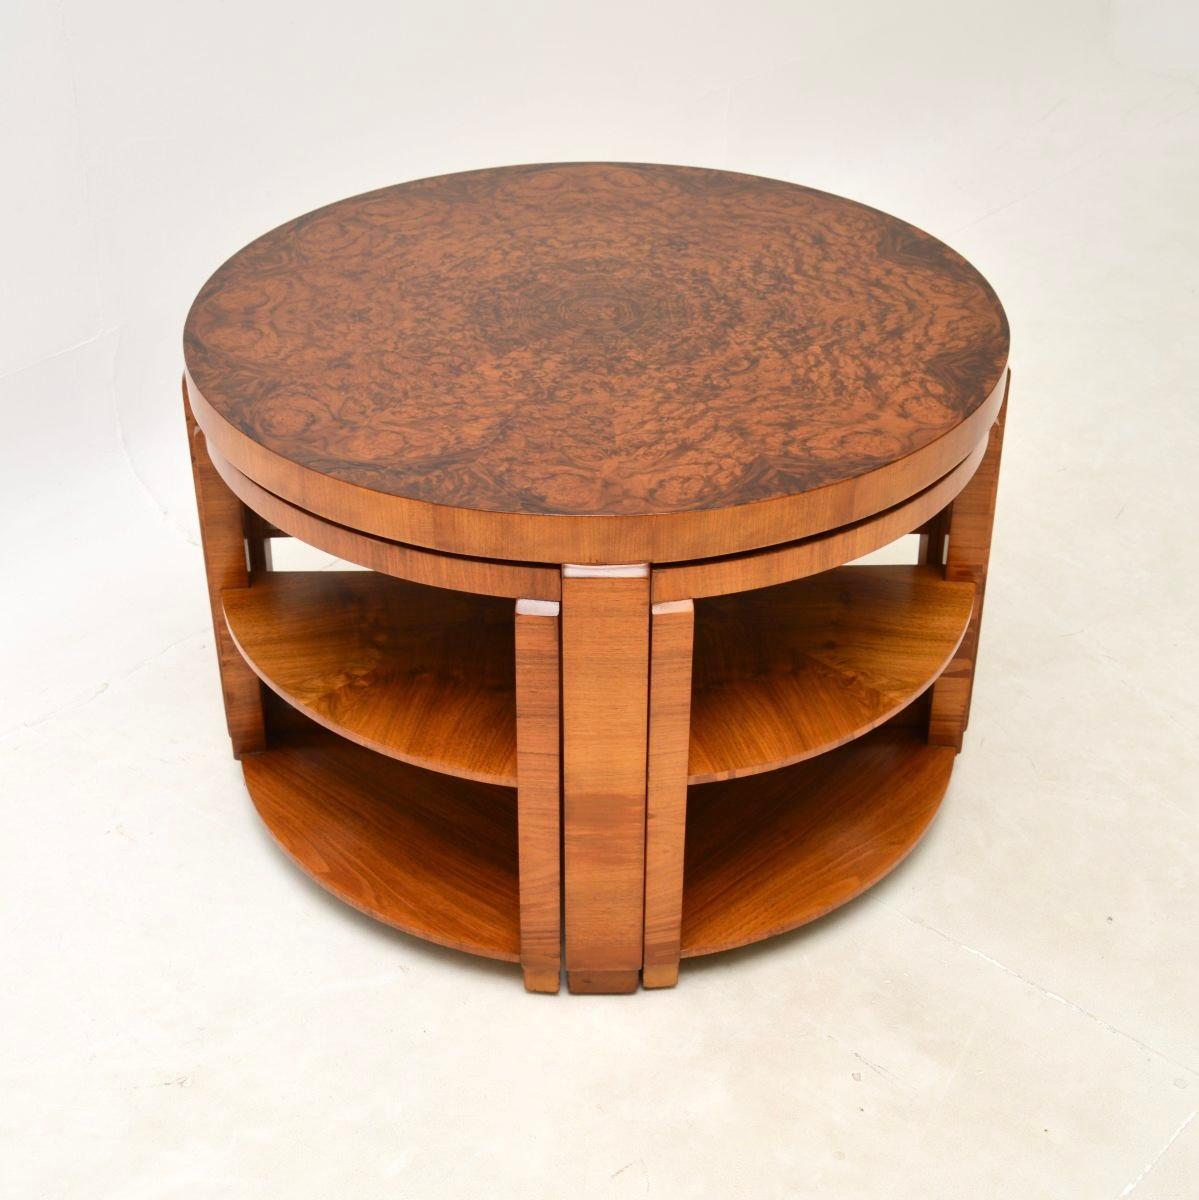 A stylish and extremely well made Art Deco burr walnut nesting coffee table. This was made in England, it dates from the 1920’s.

The quality is outstanding, this has a gorgeous design and is very practical. The four smaller pie shaped tables nest